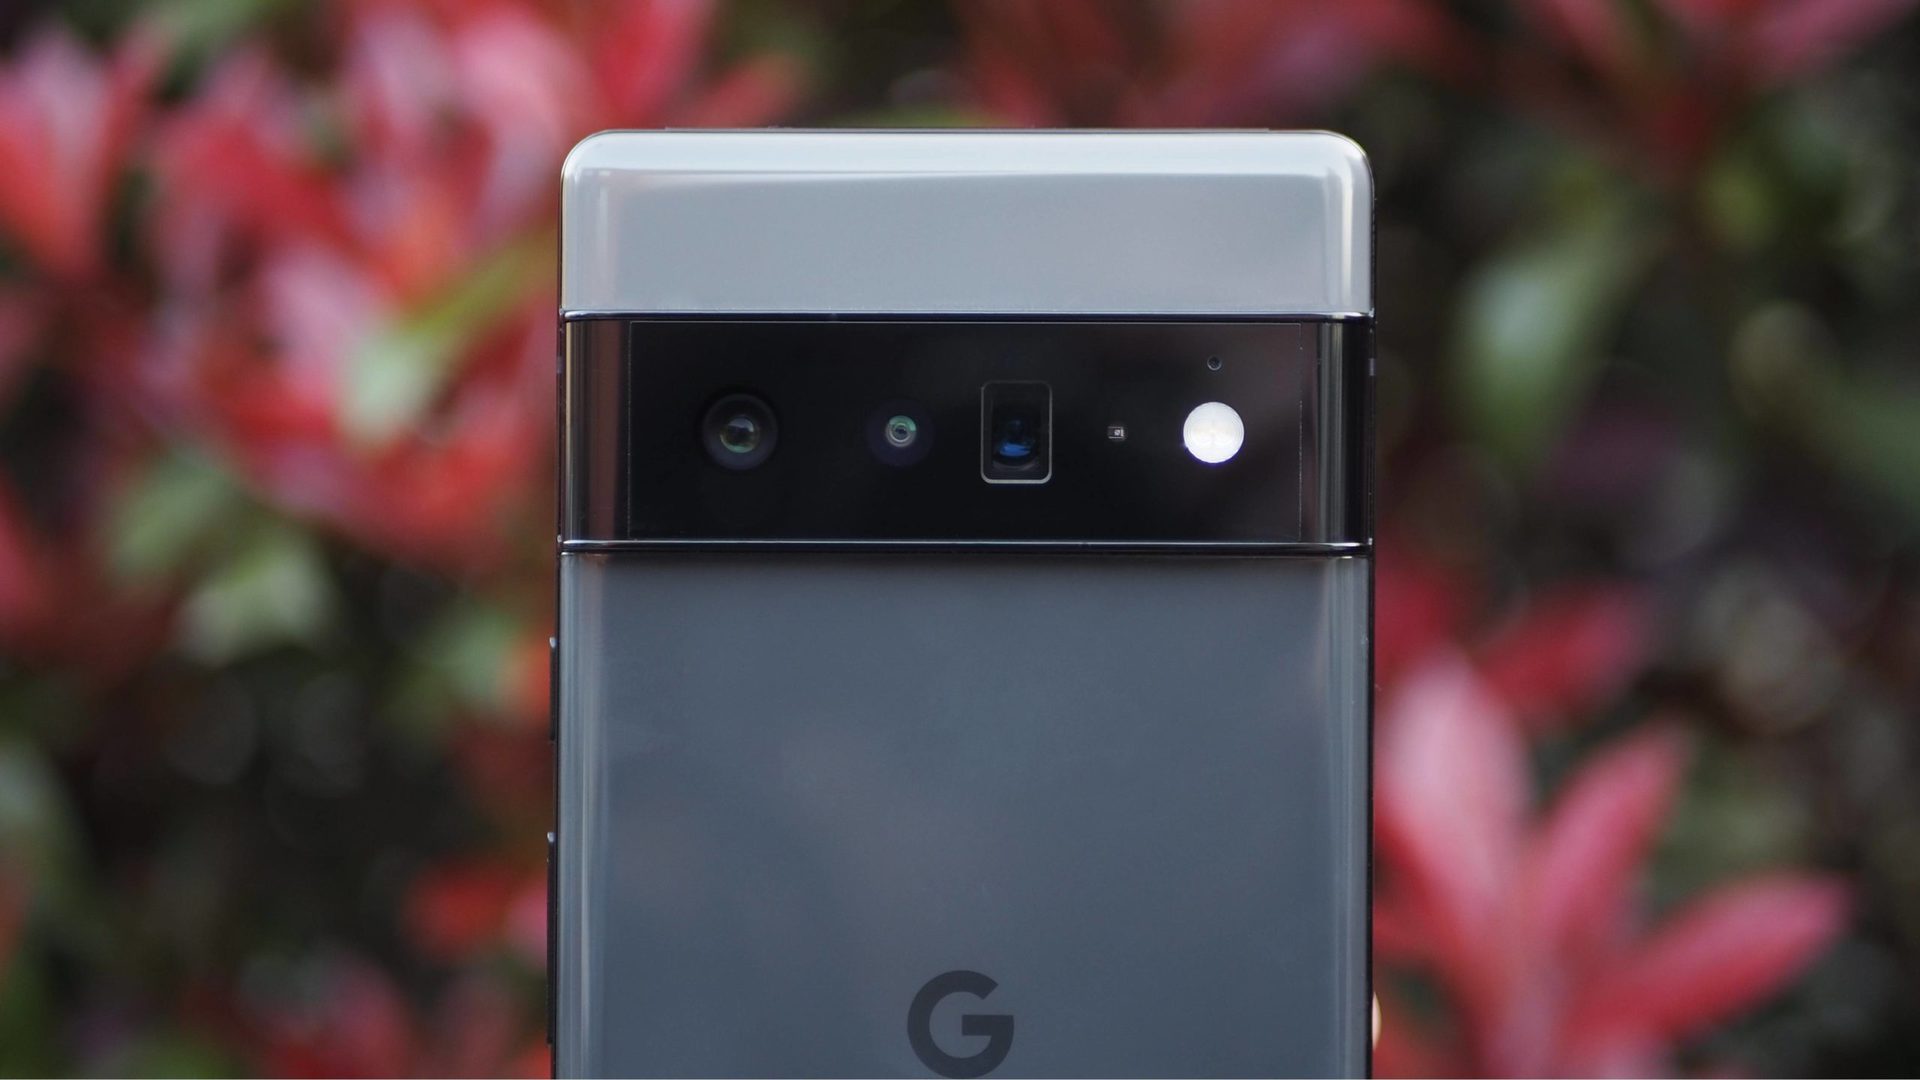 Google Pixel 6 Pro rear camera closeup with red plants in the background